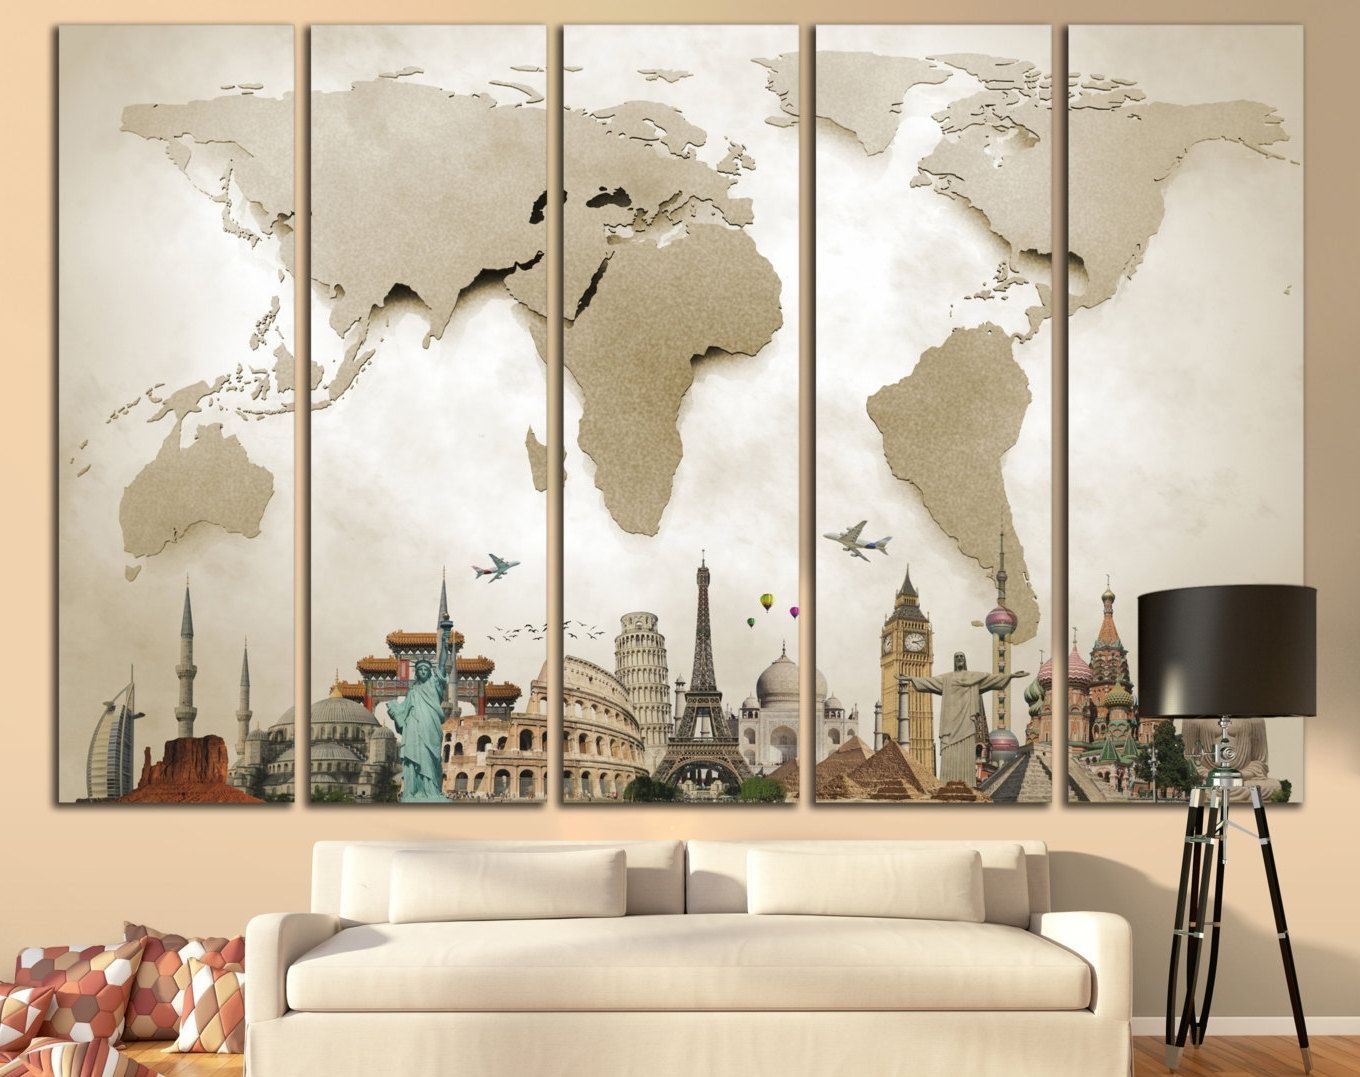 Well Known Wall Art Designs: Large Wall Art World Map Large Print Beige World Inside Big Wall Art (View 1 of 15)